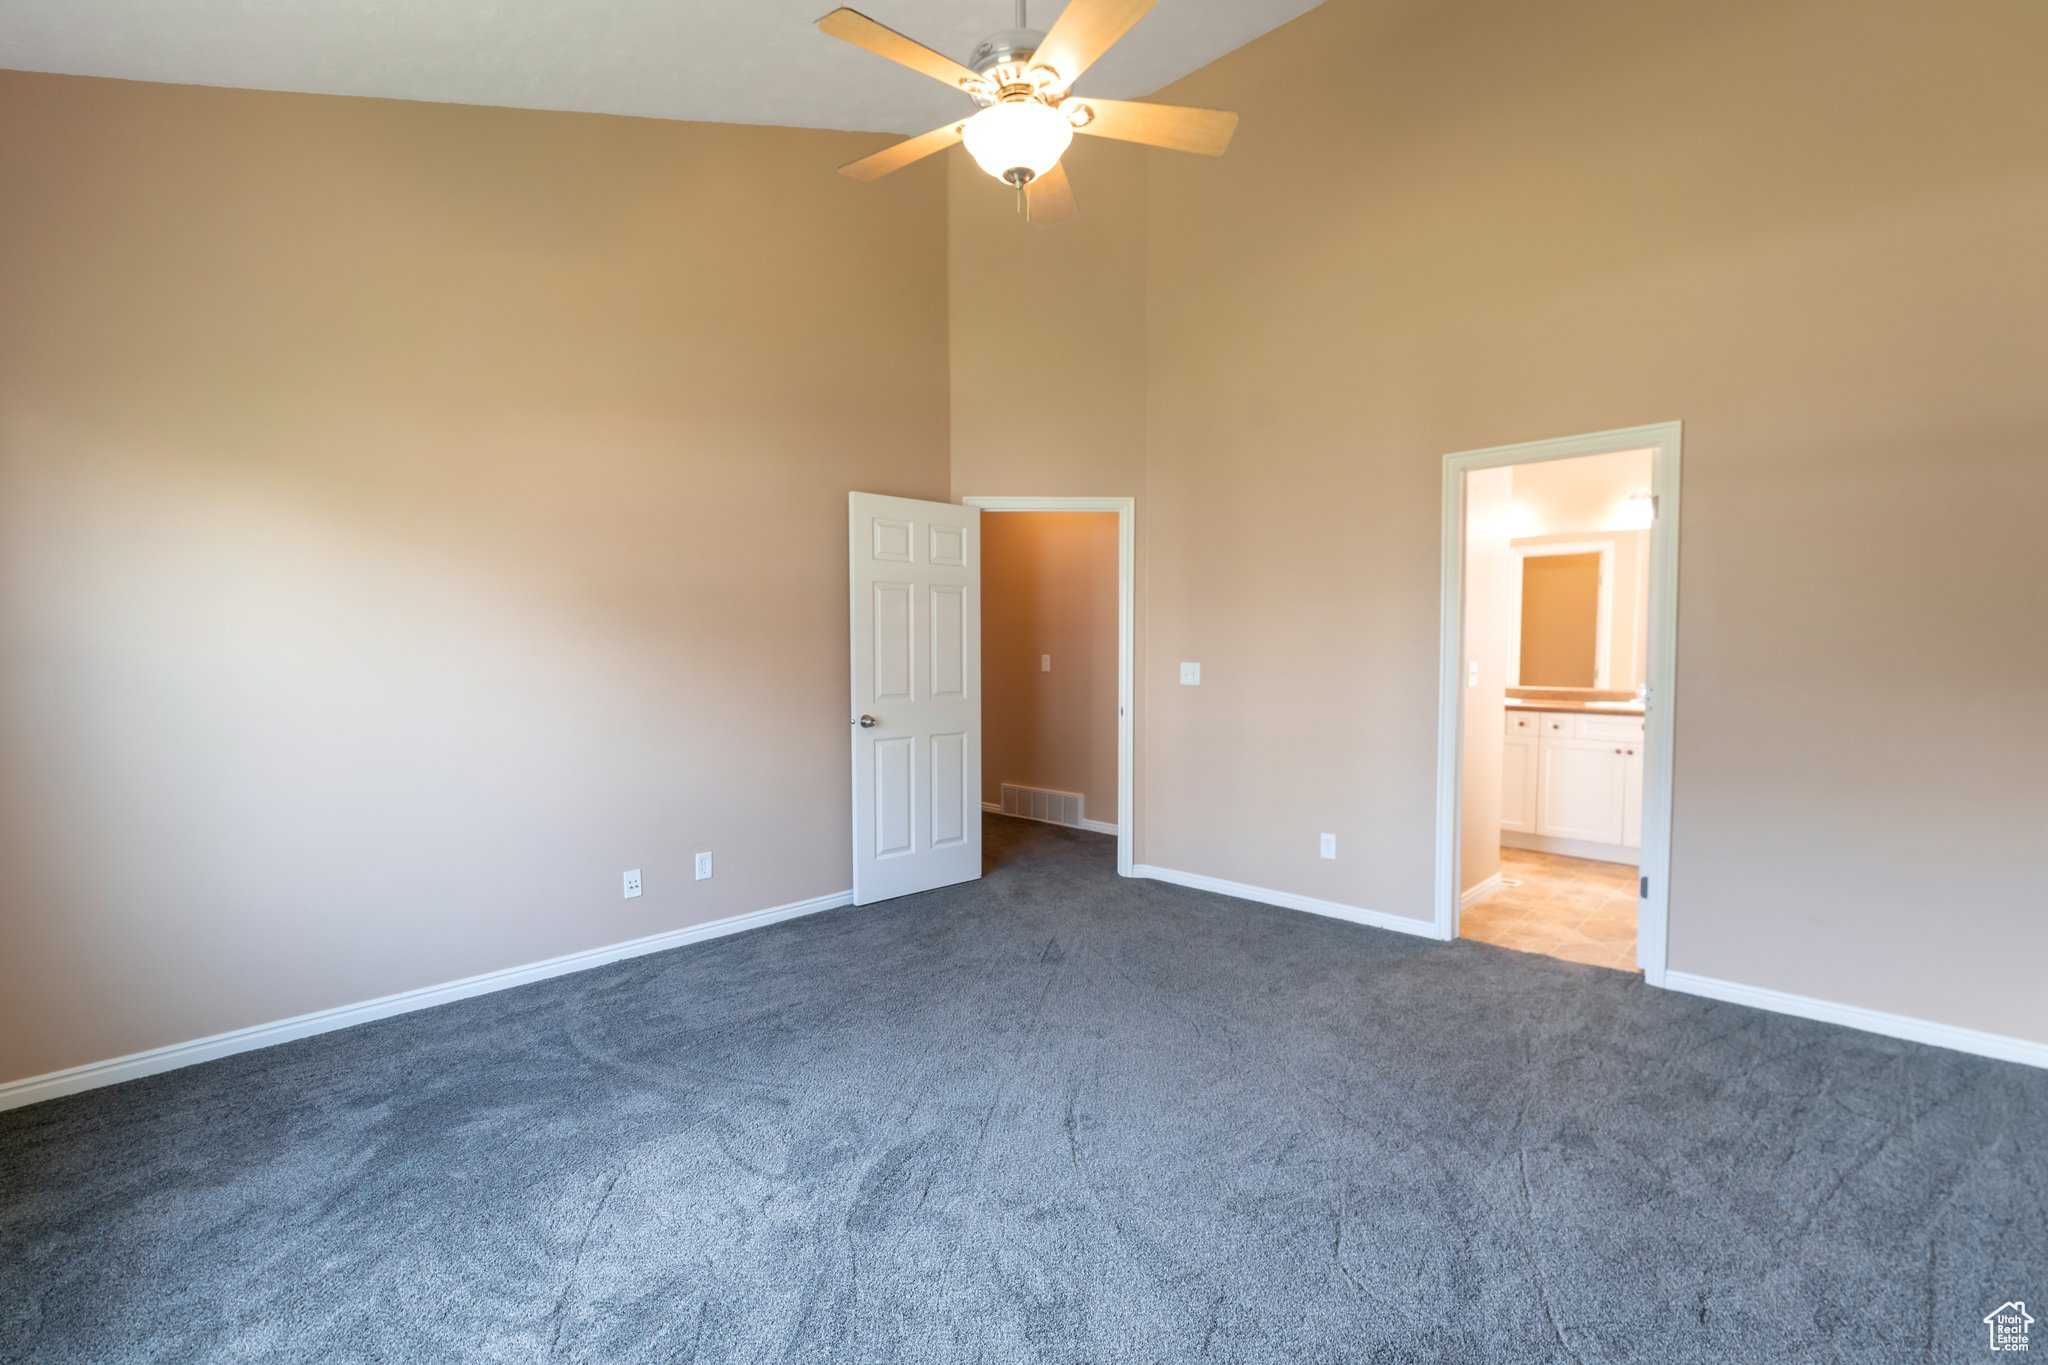 Primary bedroom featuring high vaulted ceiling, connected bathroom, ceiling fan, and carpet floors